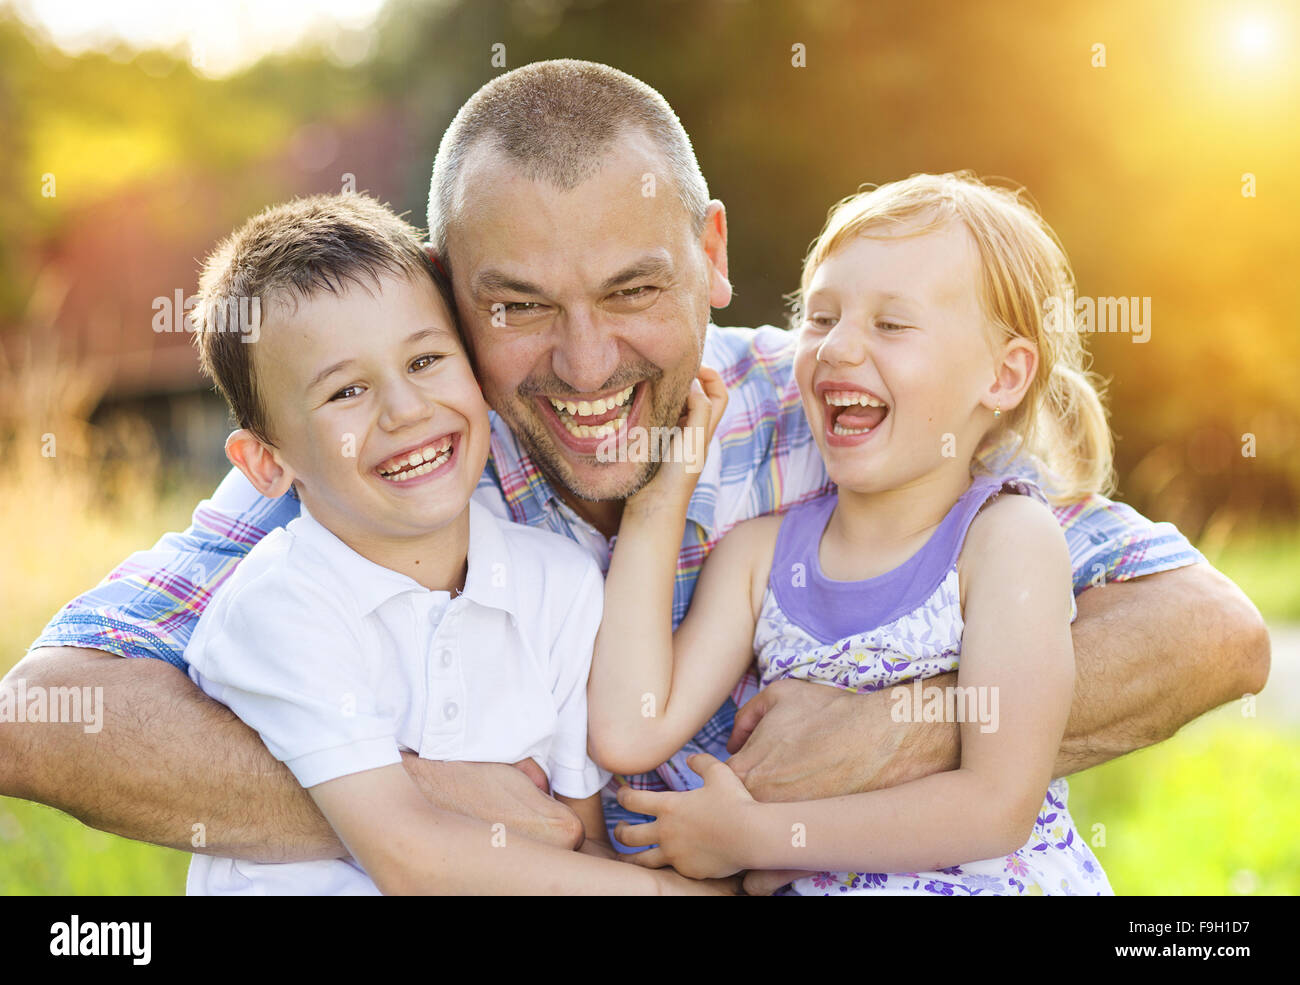 Father with his two children spending time together outside in green nature. Stock Photo